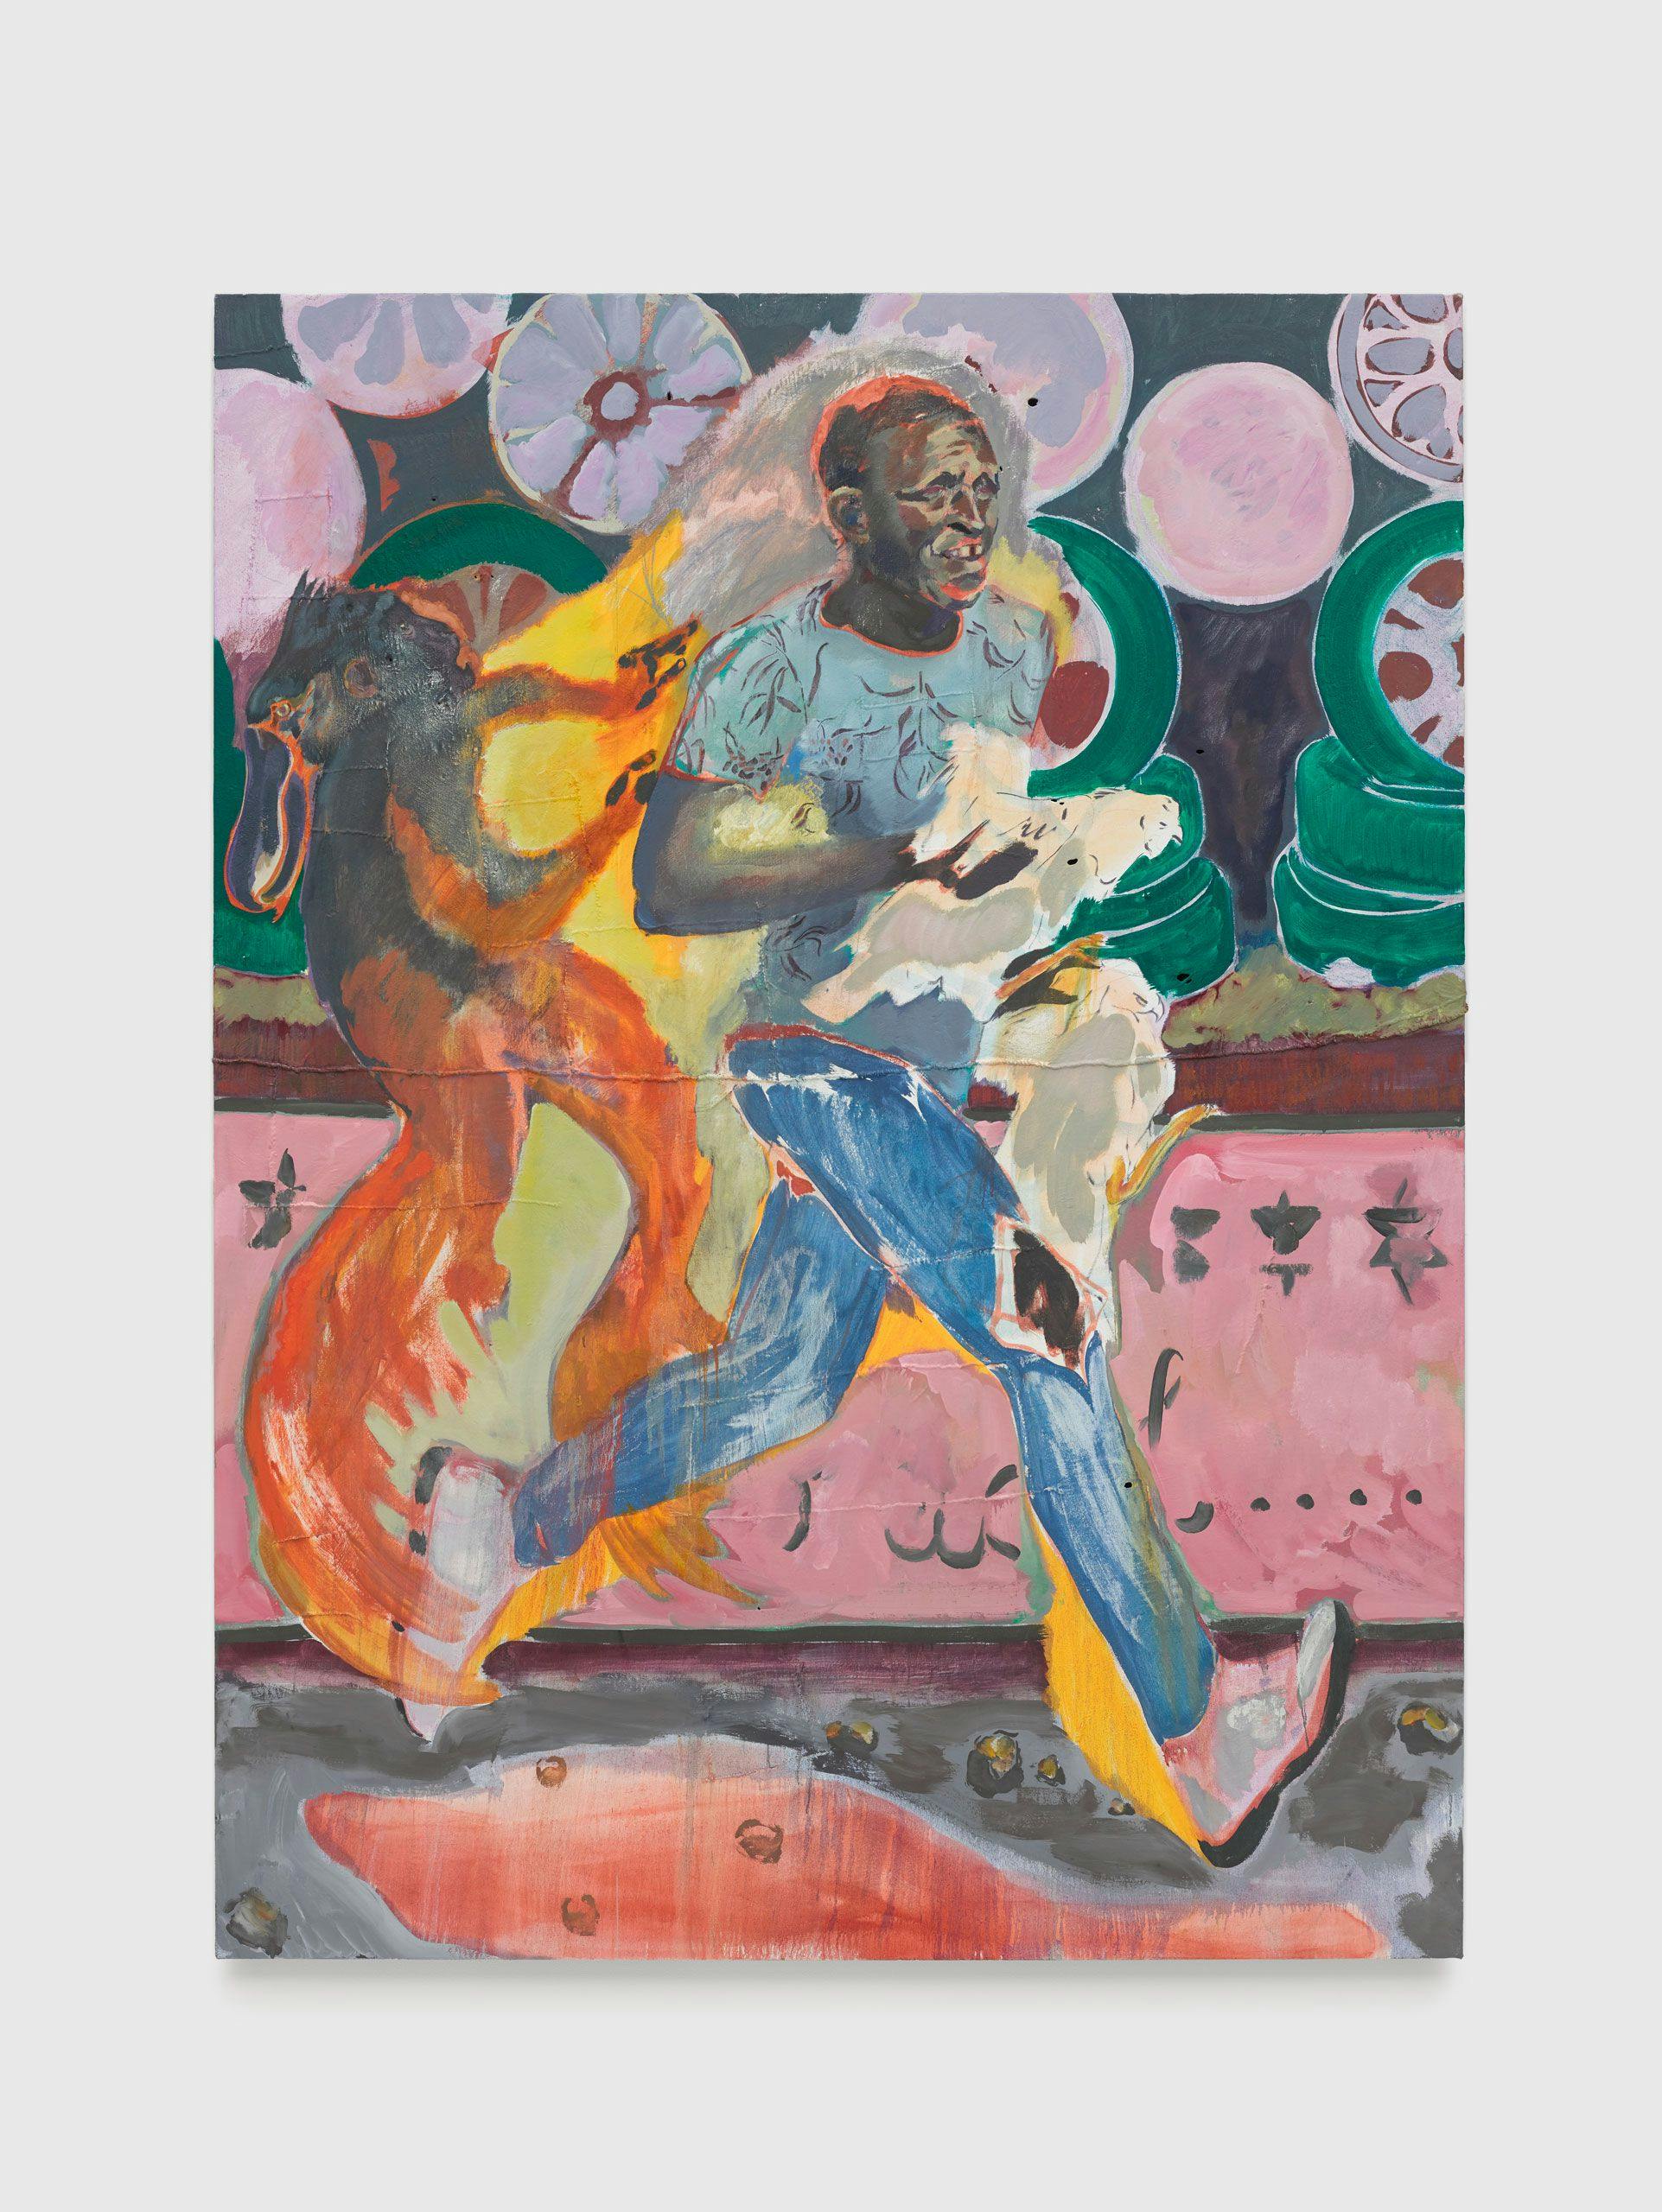 An oil on Lubugo bark cloth painting by Michael Armitage, titled The Chicken Thief, dated 2019.